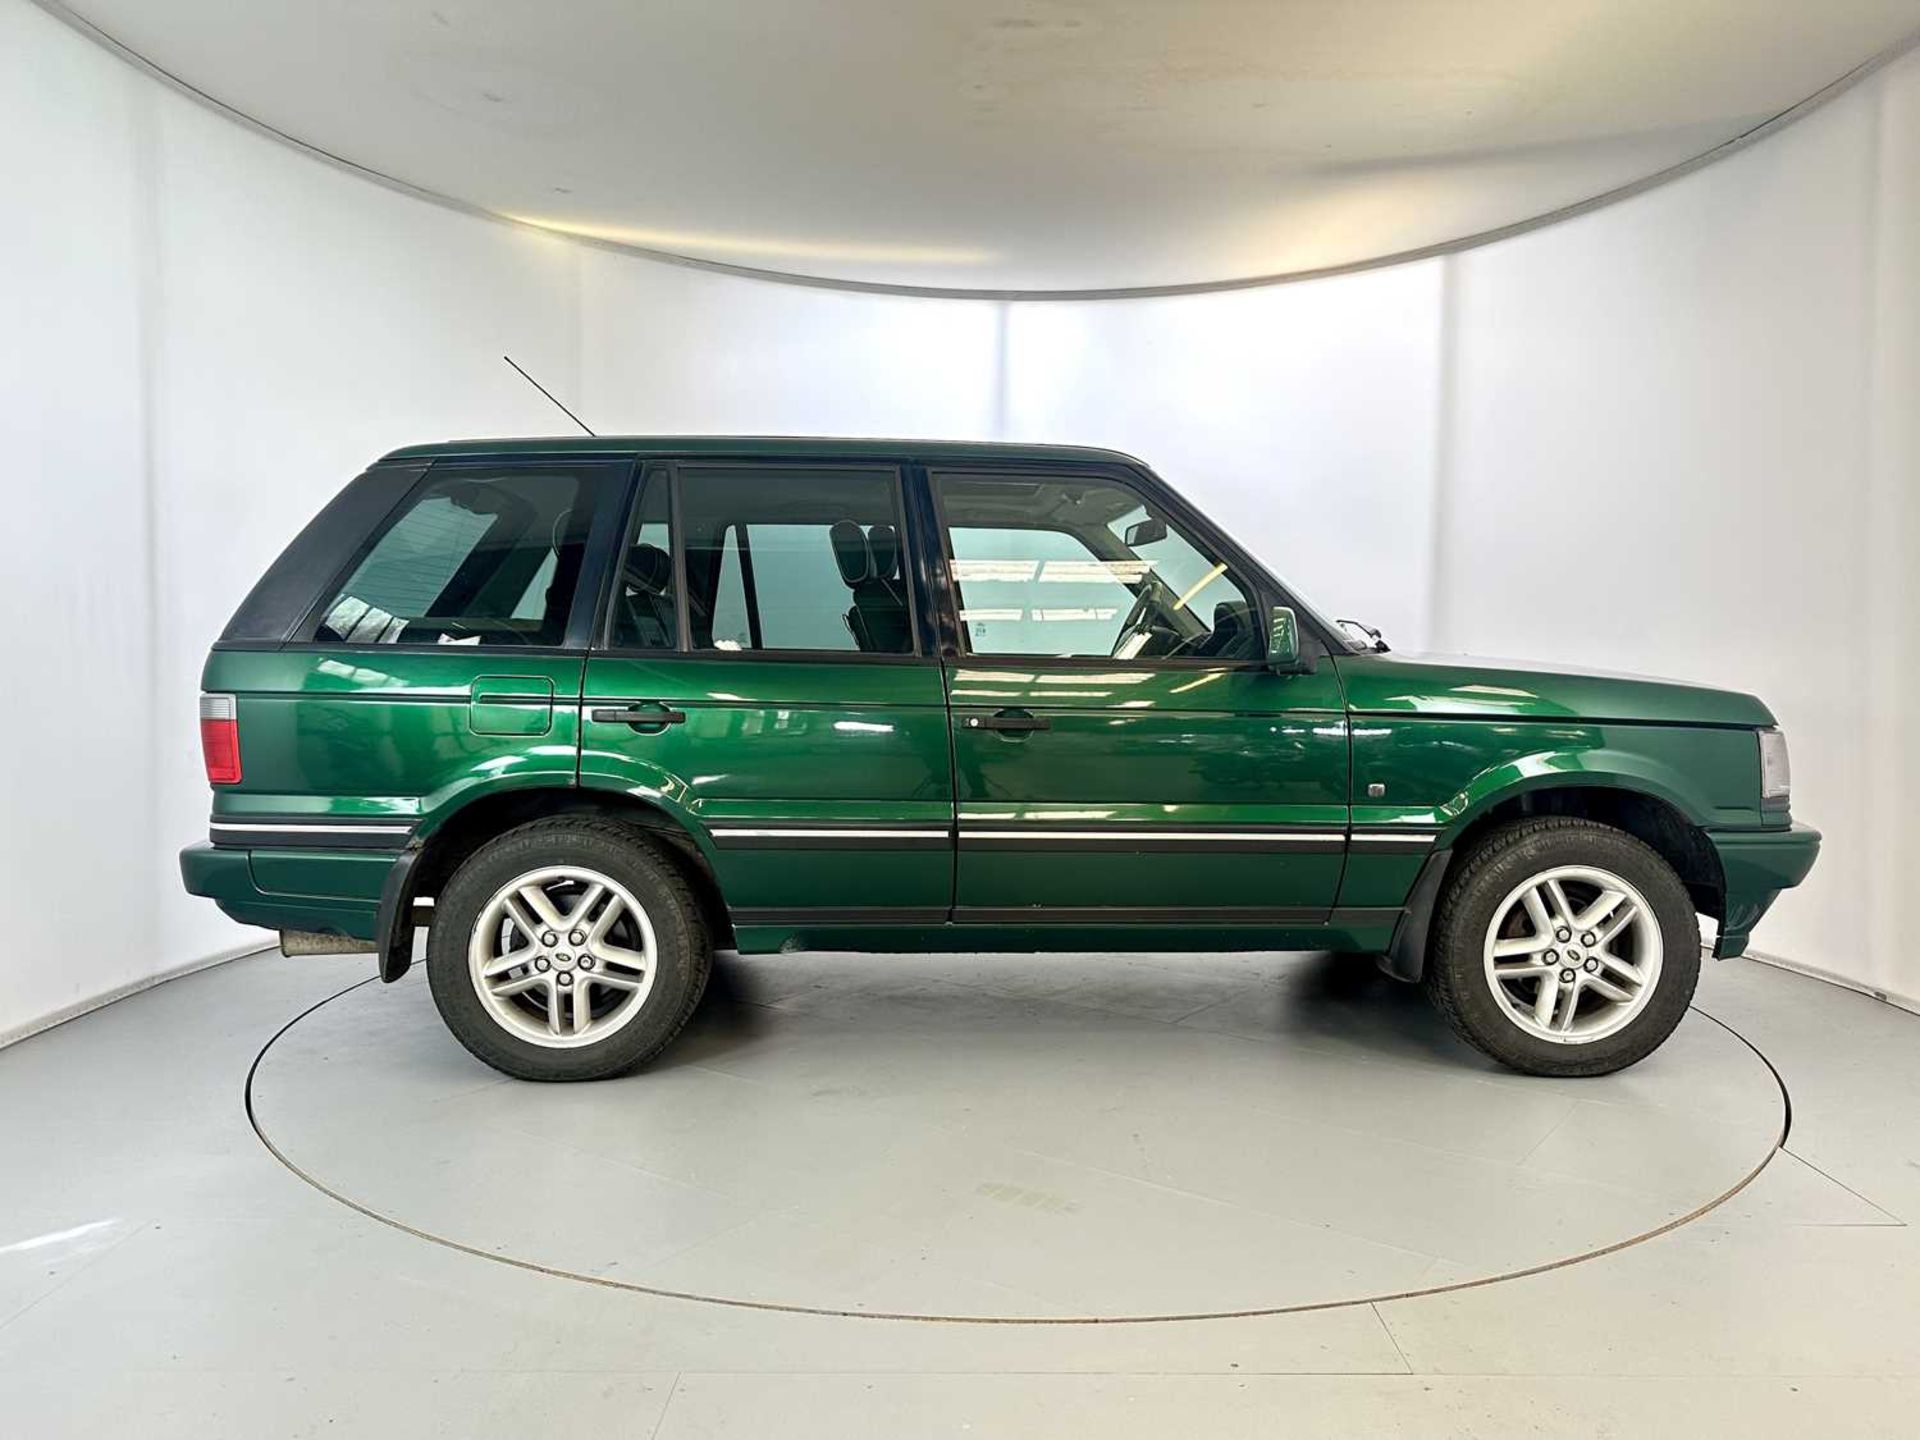 2001 Land Rover Range Rover 30th Anniversary Edition - Image 11 of 35